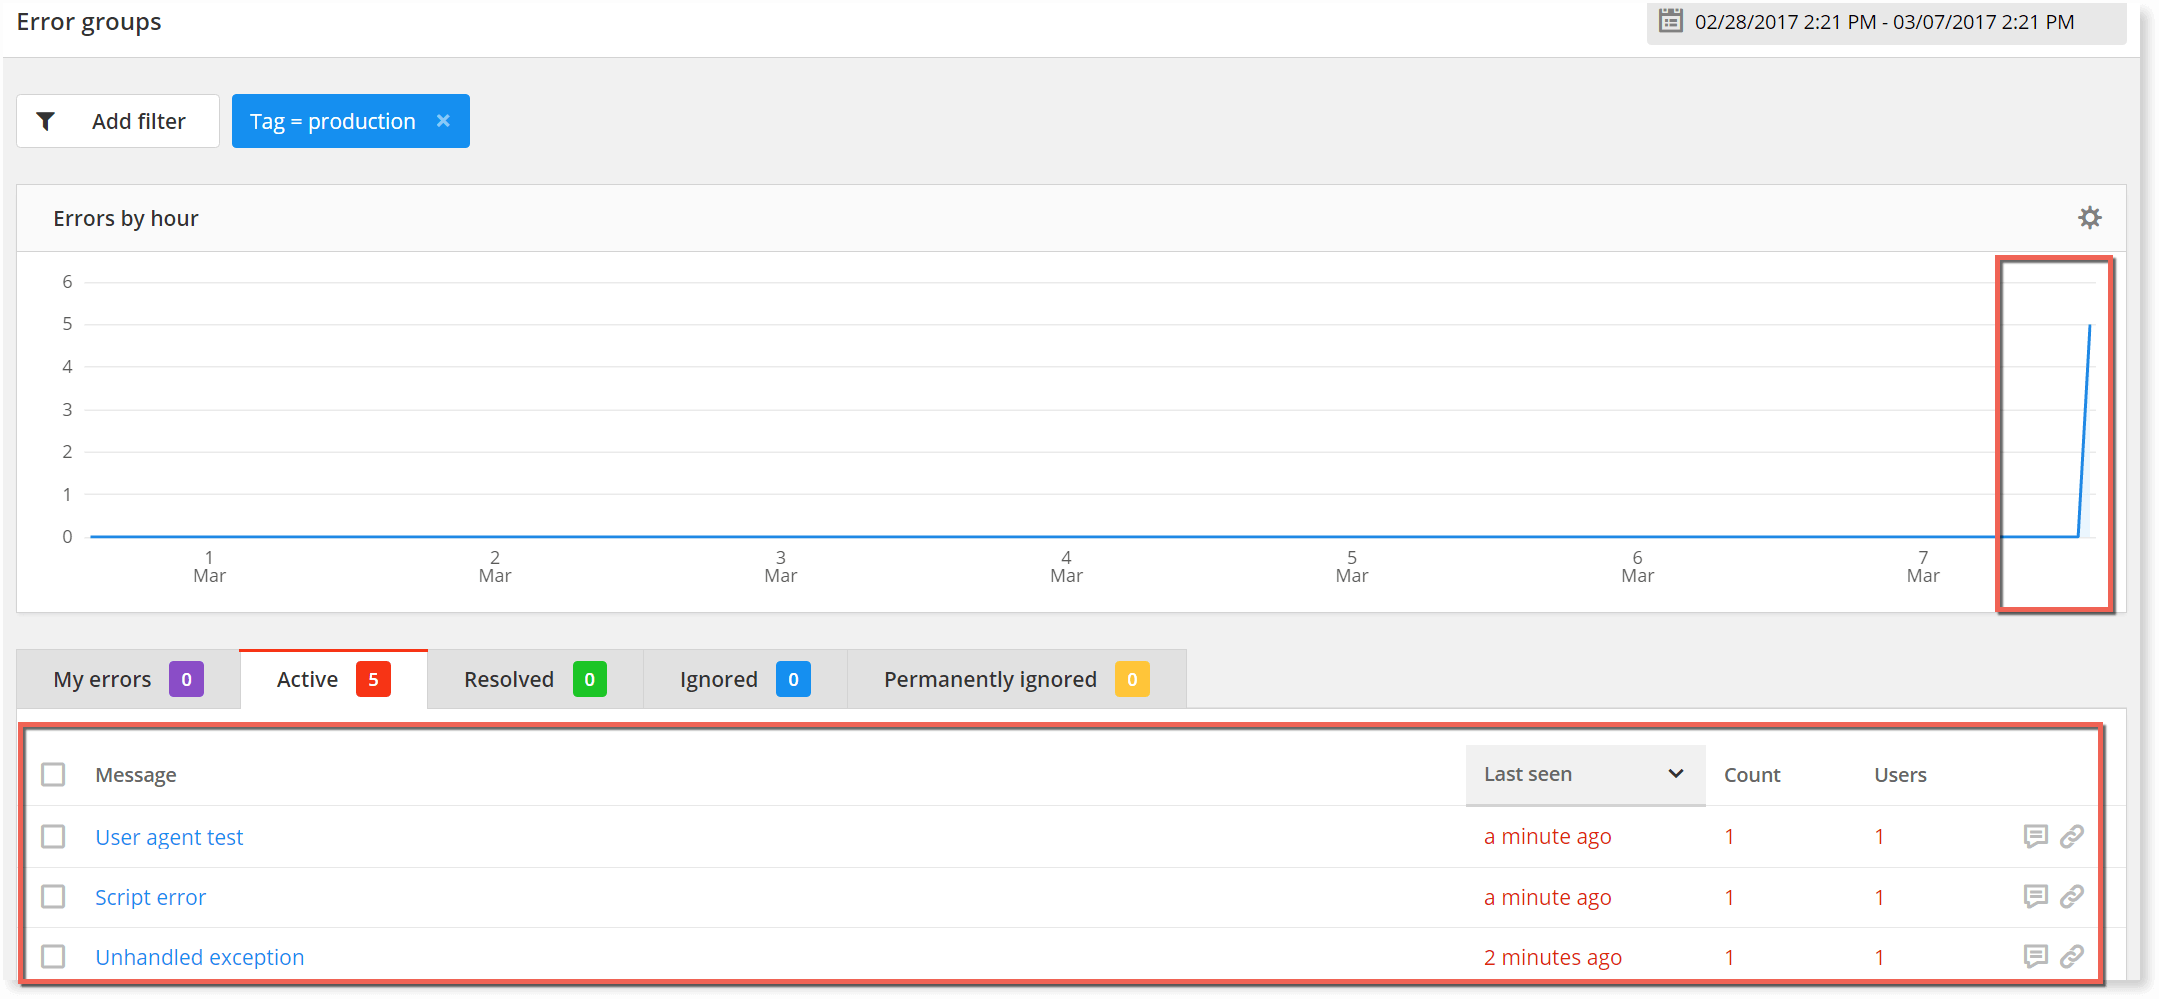 Clicking on the error tag will take you to the dashboard with only those errors related to the tag